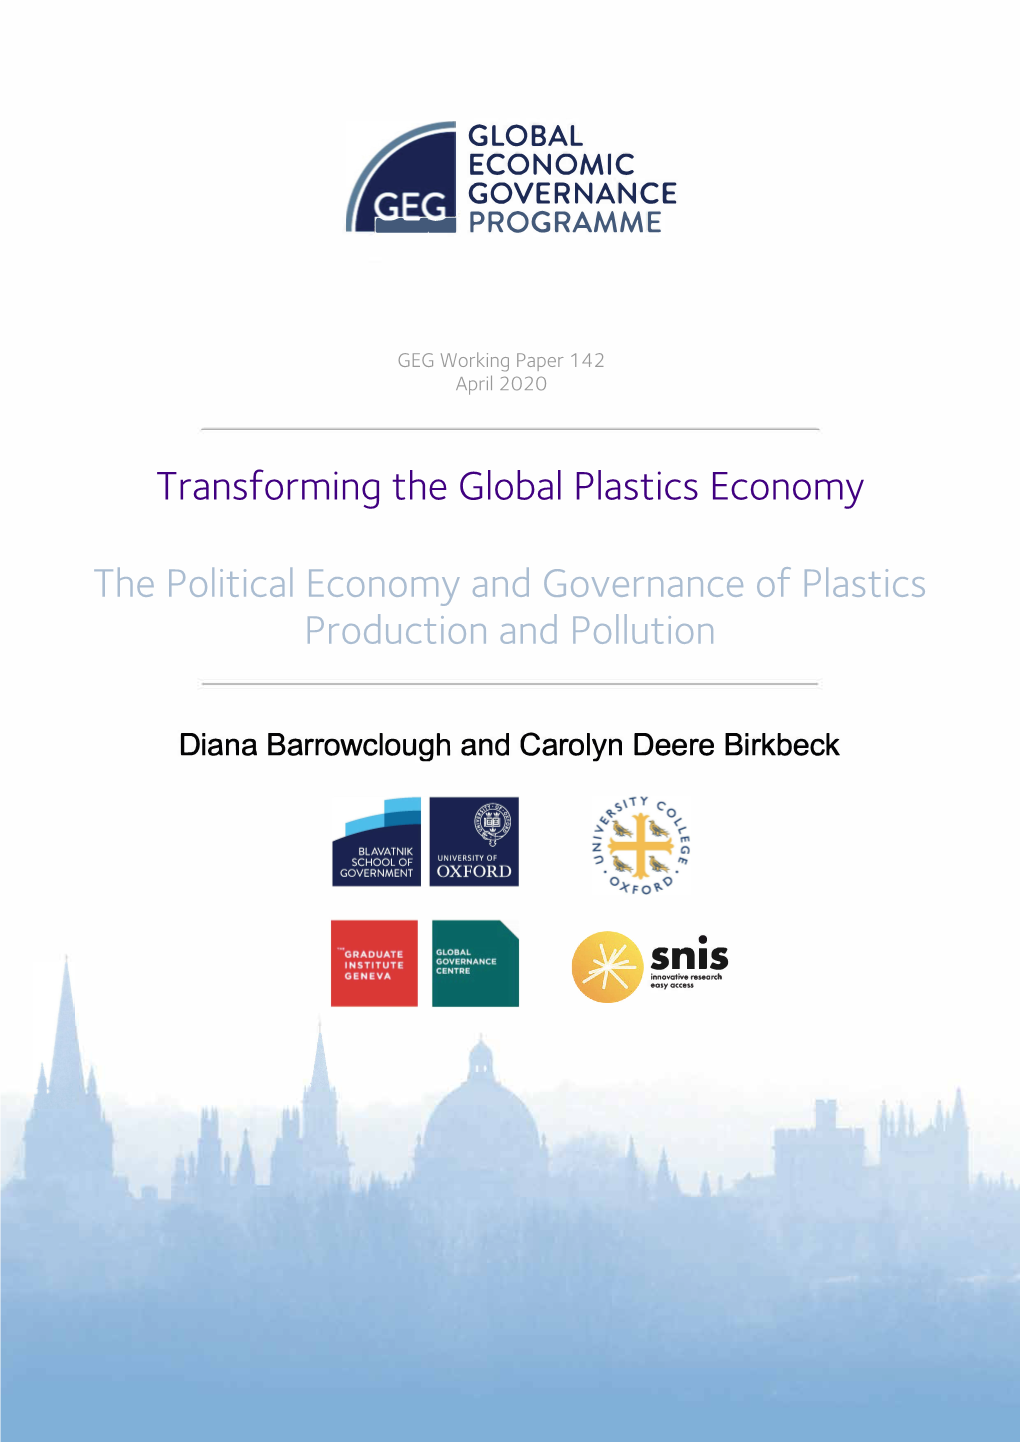 The Political Economy and Governance of Plastics Production and Pollution